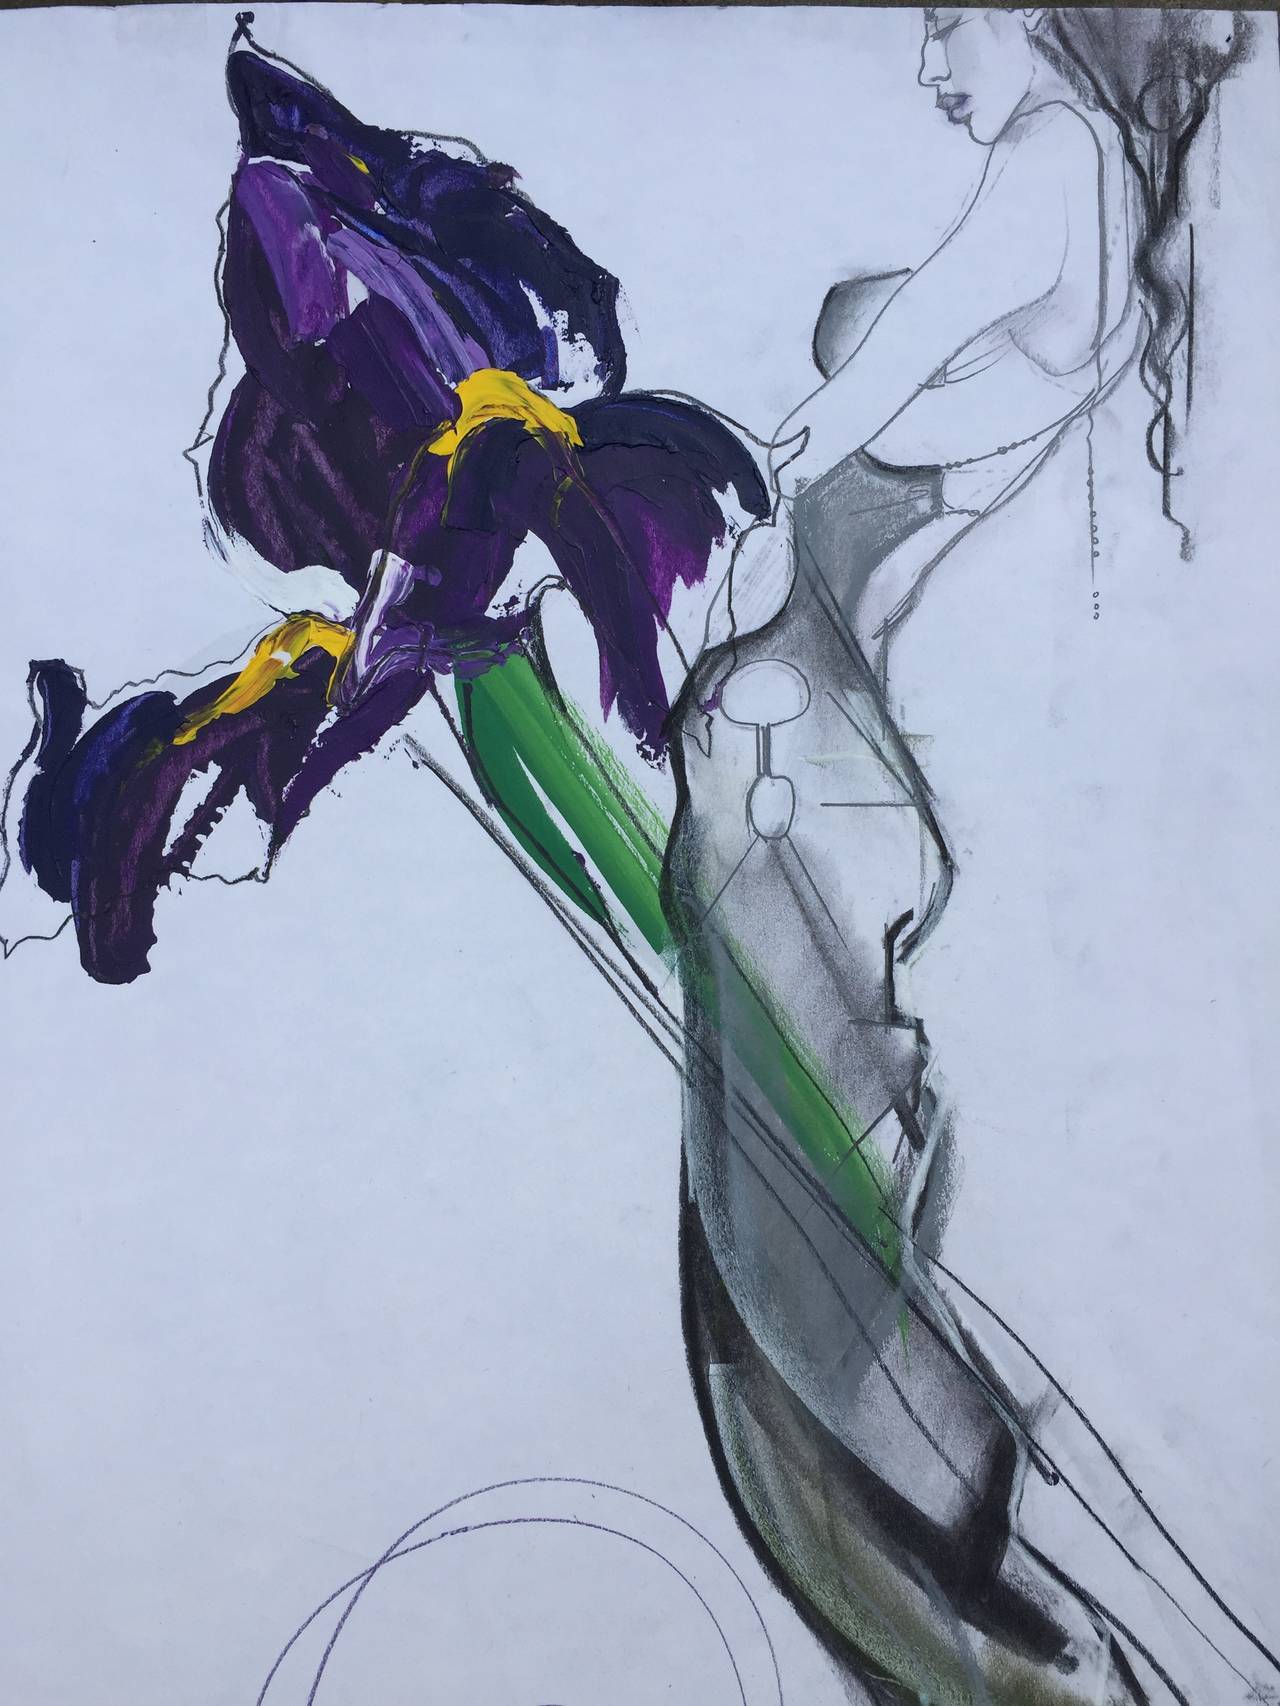 John Galliano Original 1990's Fashion Illustration.
This is an original artwork by John Galliano in the mid 1990's.
It was created for a UK Fashion charity calendar , this was the April page with a very dramatic Iris.
The original artworks were